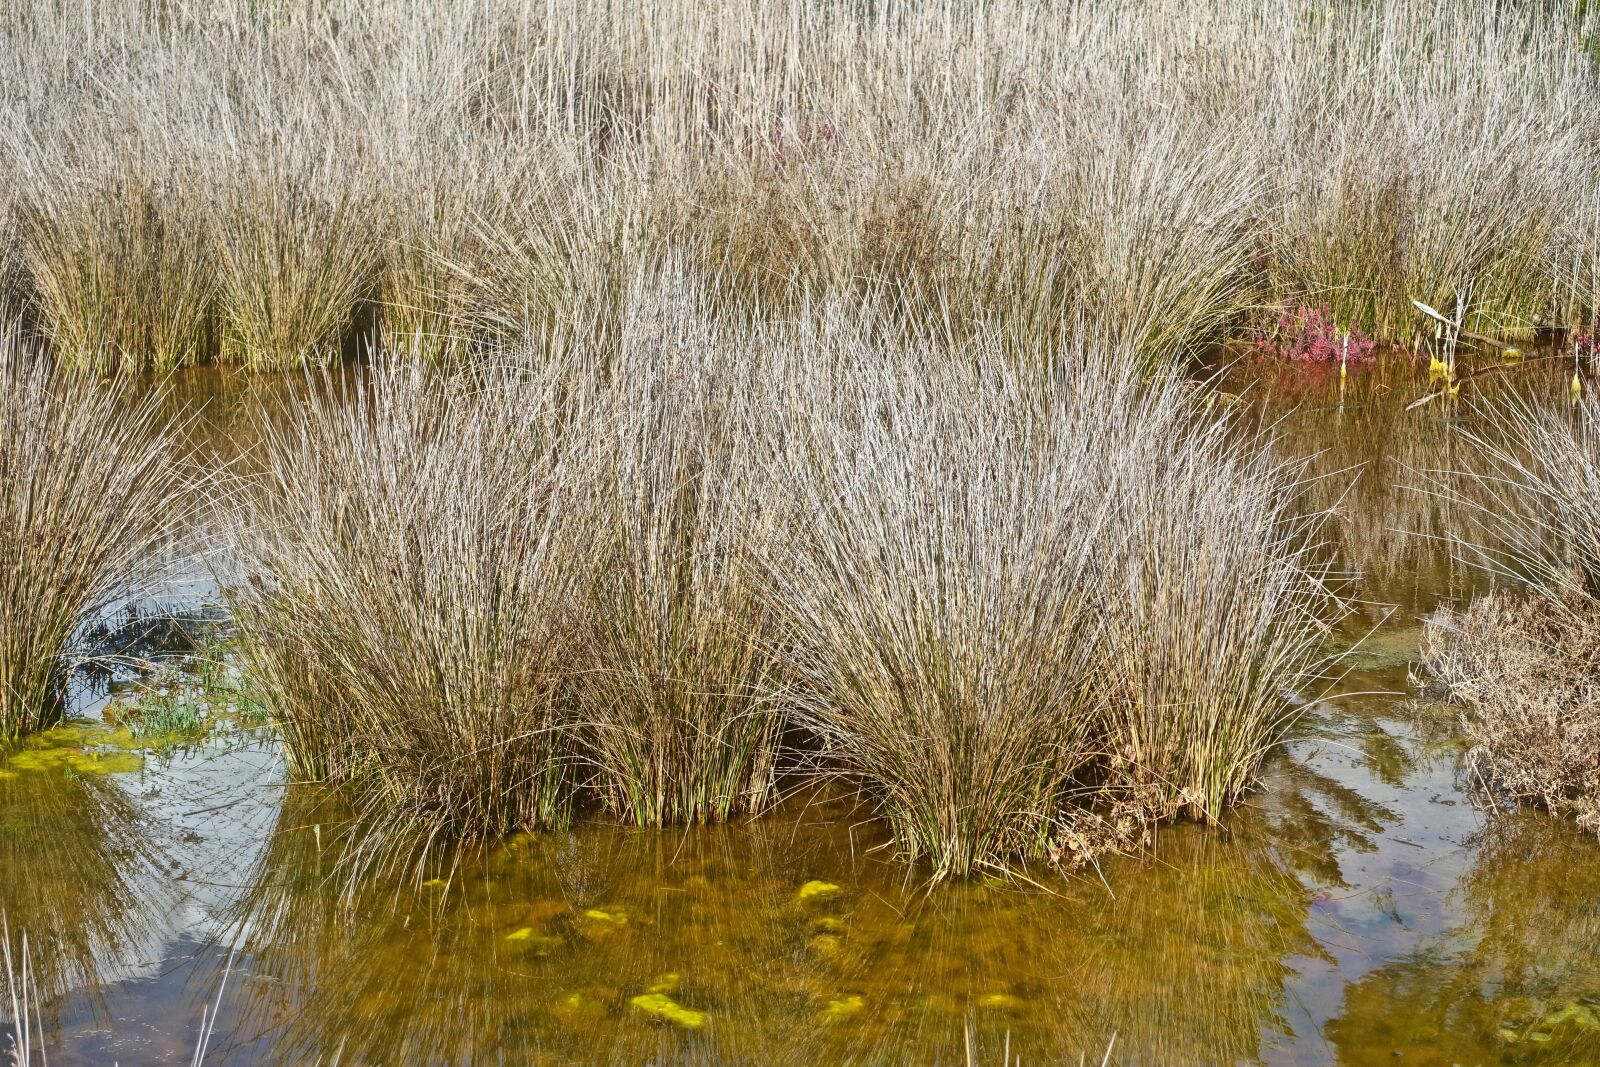 Sony Cyber-shot DSC-RX100 III sample photo. Grass, reeds, waters photography